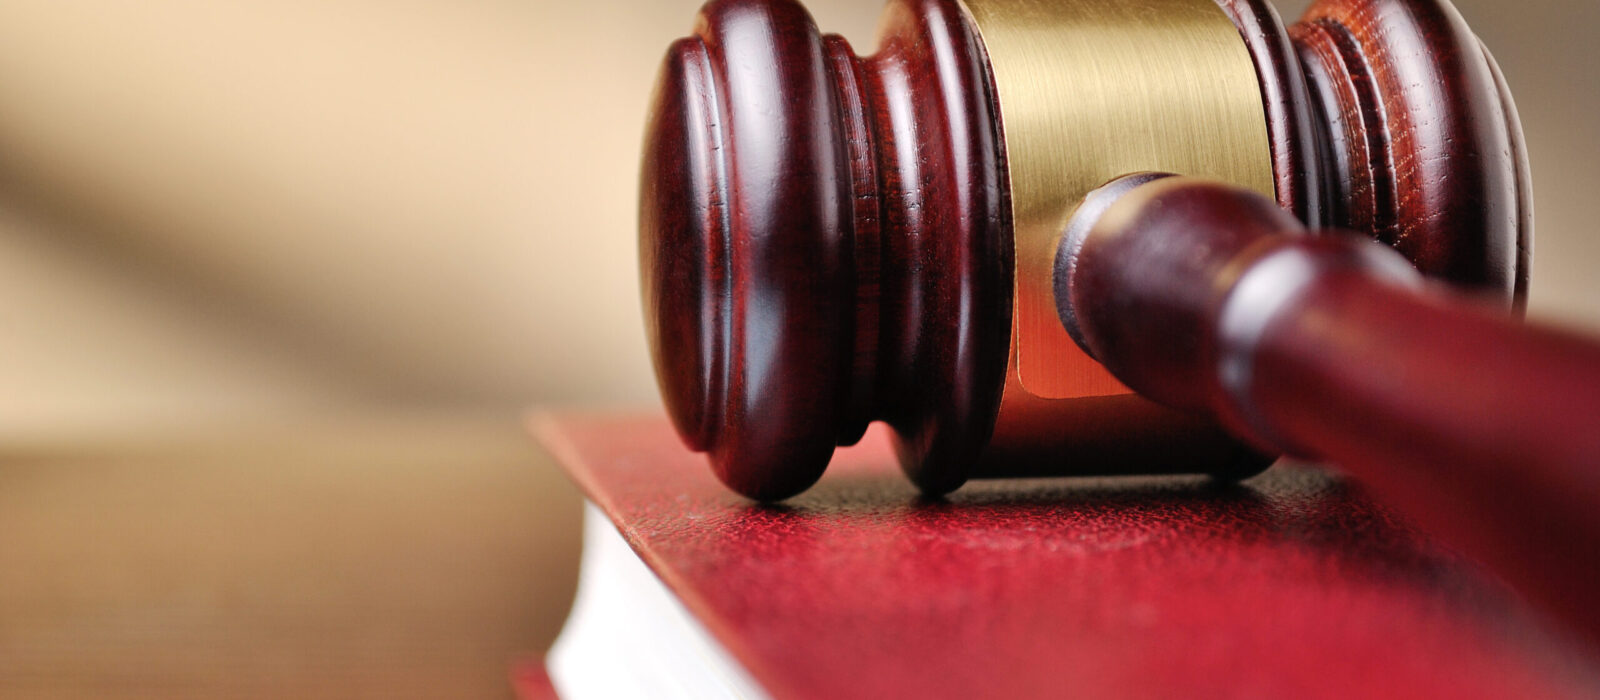 Wooden judges gavel with a brass band around the head resting on top of a closed red law book with shallow dof and copyspace